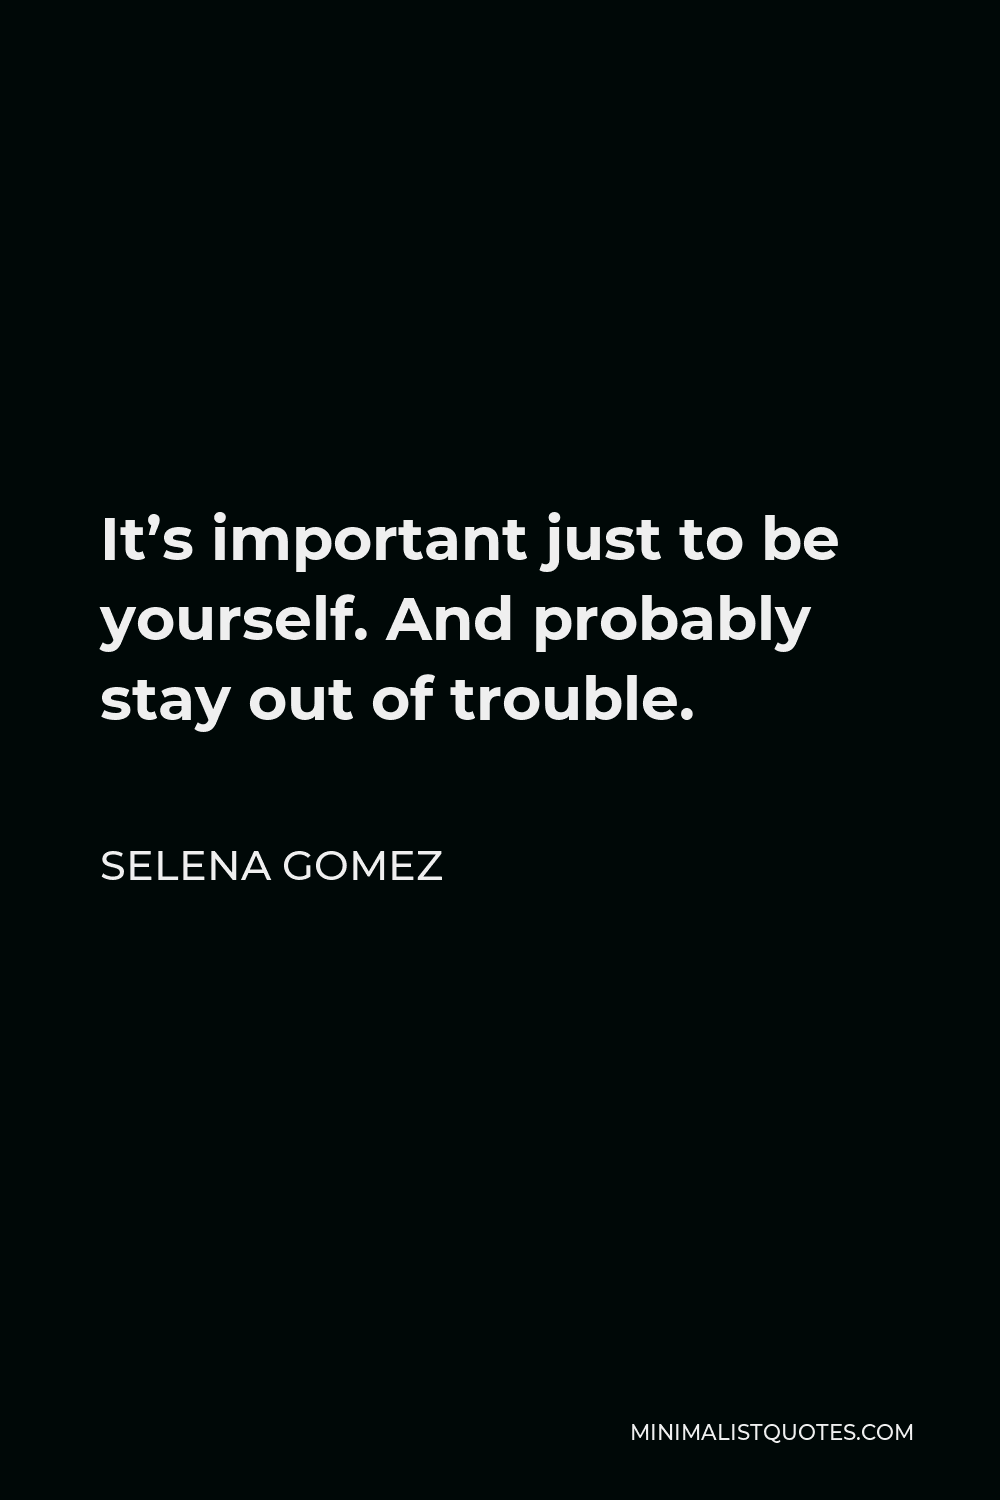 Selena Gomez Quote - It’s important just to be yourself. And probably stay out of trouble.